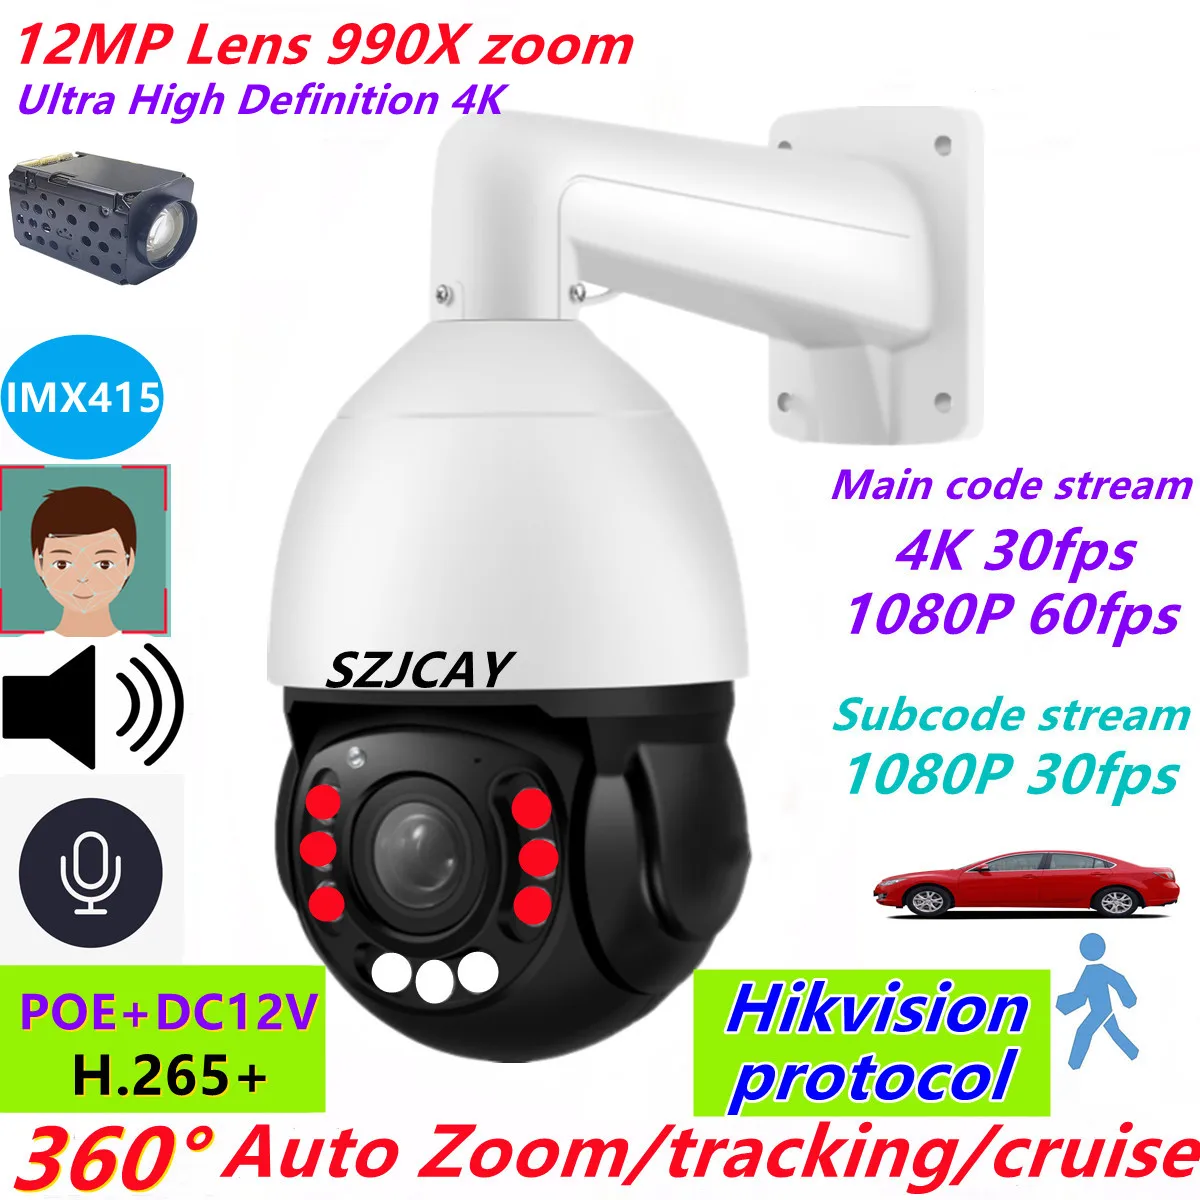 12MP 4K PTZ POE Zoom IP Camera Hikvision Protocol Outdoor Color Automatic Tracking Video Security High Speed Dome PTZ Camera 12mp 4k poe wifi 990x zoom high speed dome ptz ip camera outdoor color ai automatic tracking video security 8mp cctv ip camera